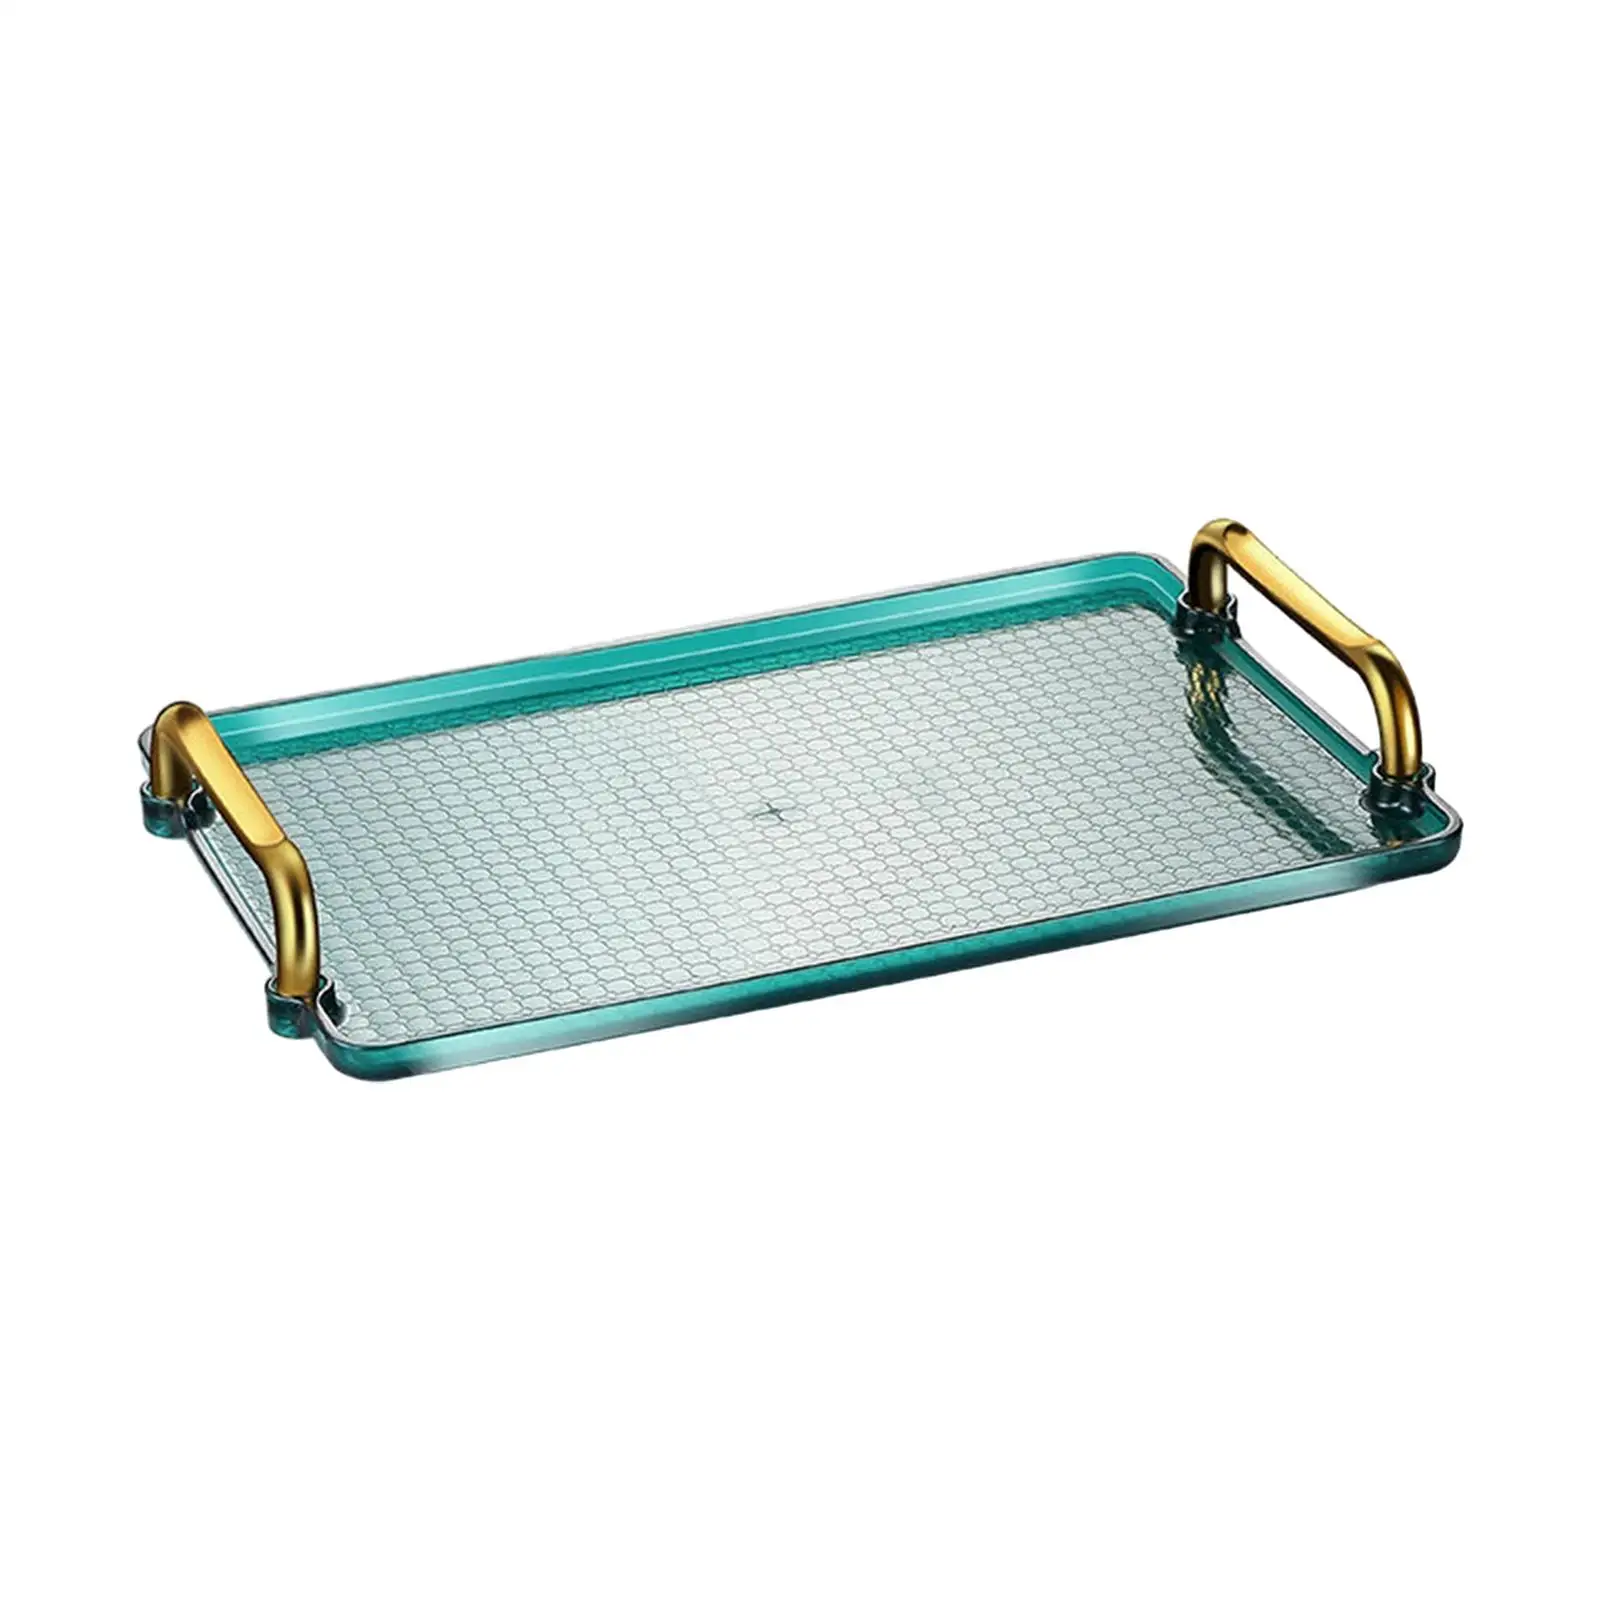 Serving Tray Platter Housewarming Gift for Bar, Kitchen, Dining Room Multipurpose Sturdy Decorative Sofa Couch Tray Ottoman Tray